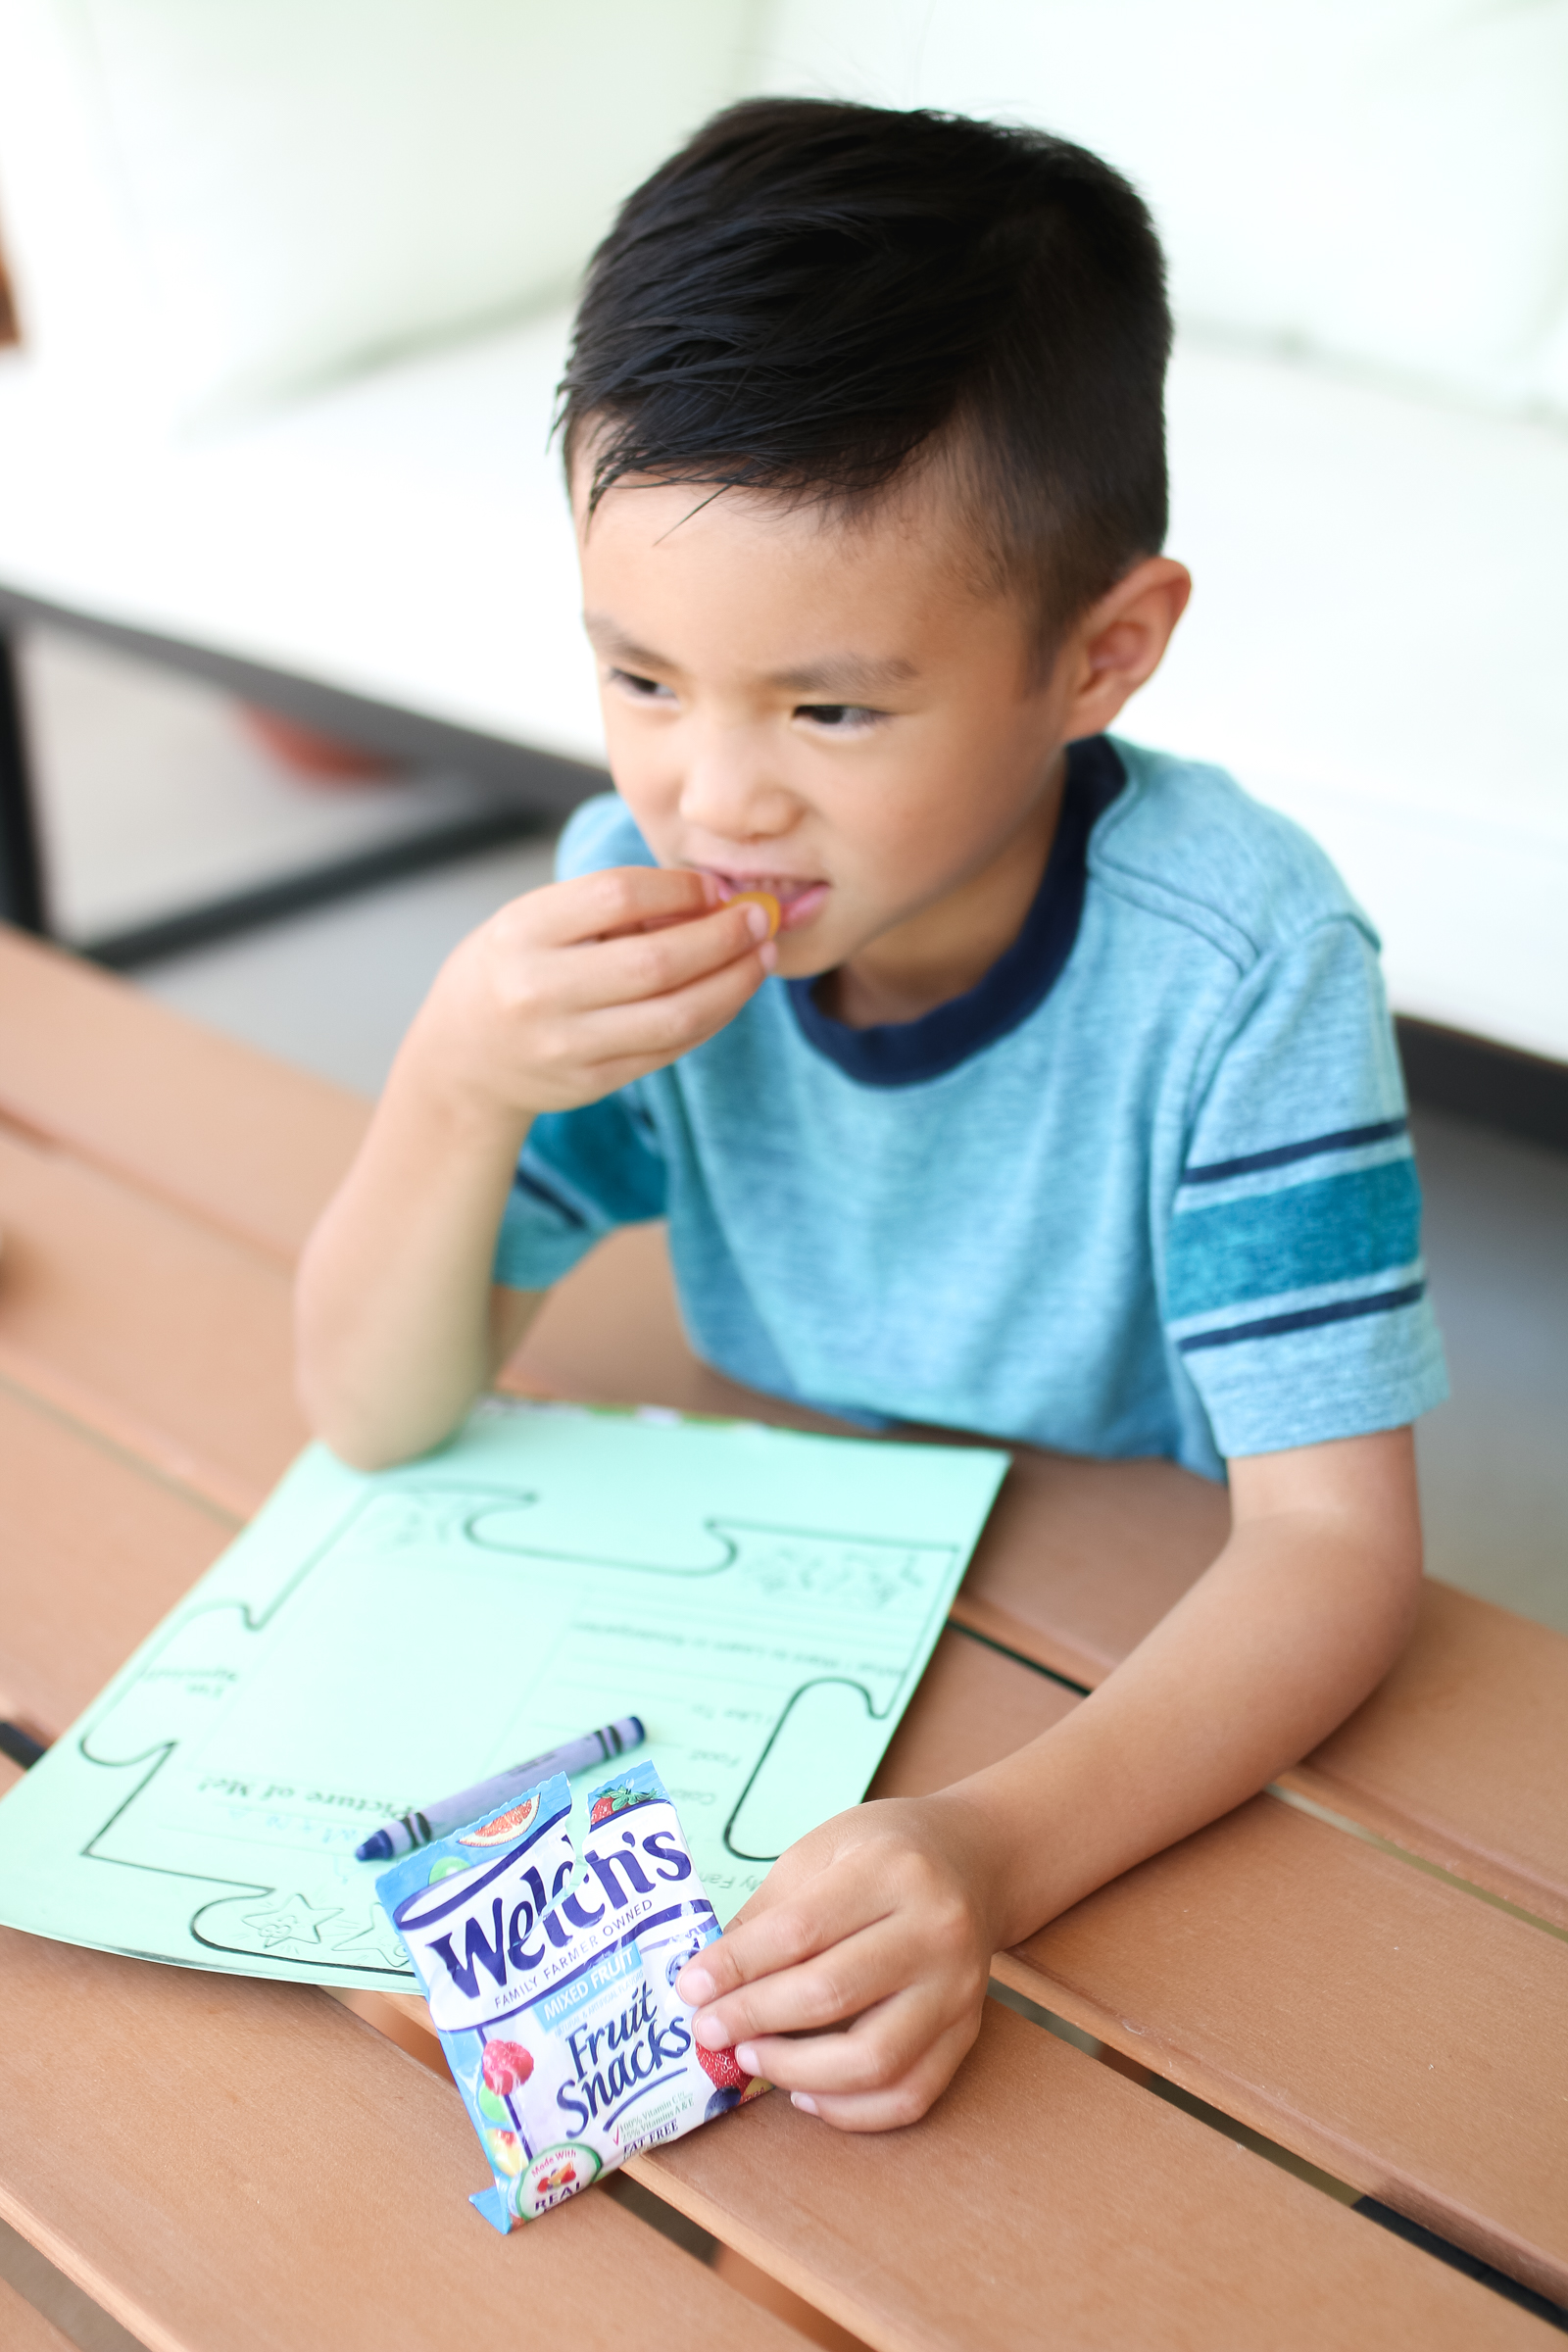 welch's fruit snacks - A Great Snack For Kids and Busy Moms by Utah mom blogger Sandy A La Mode